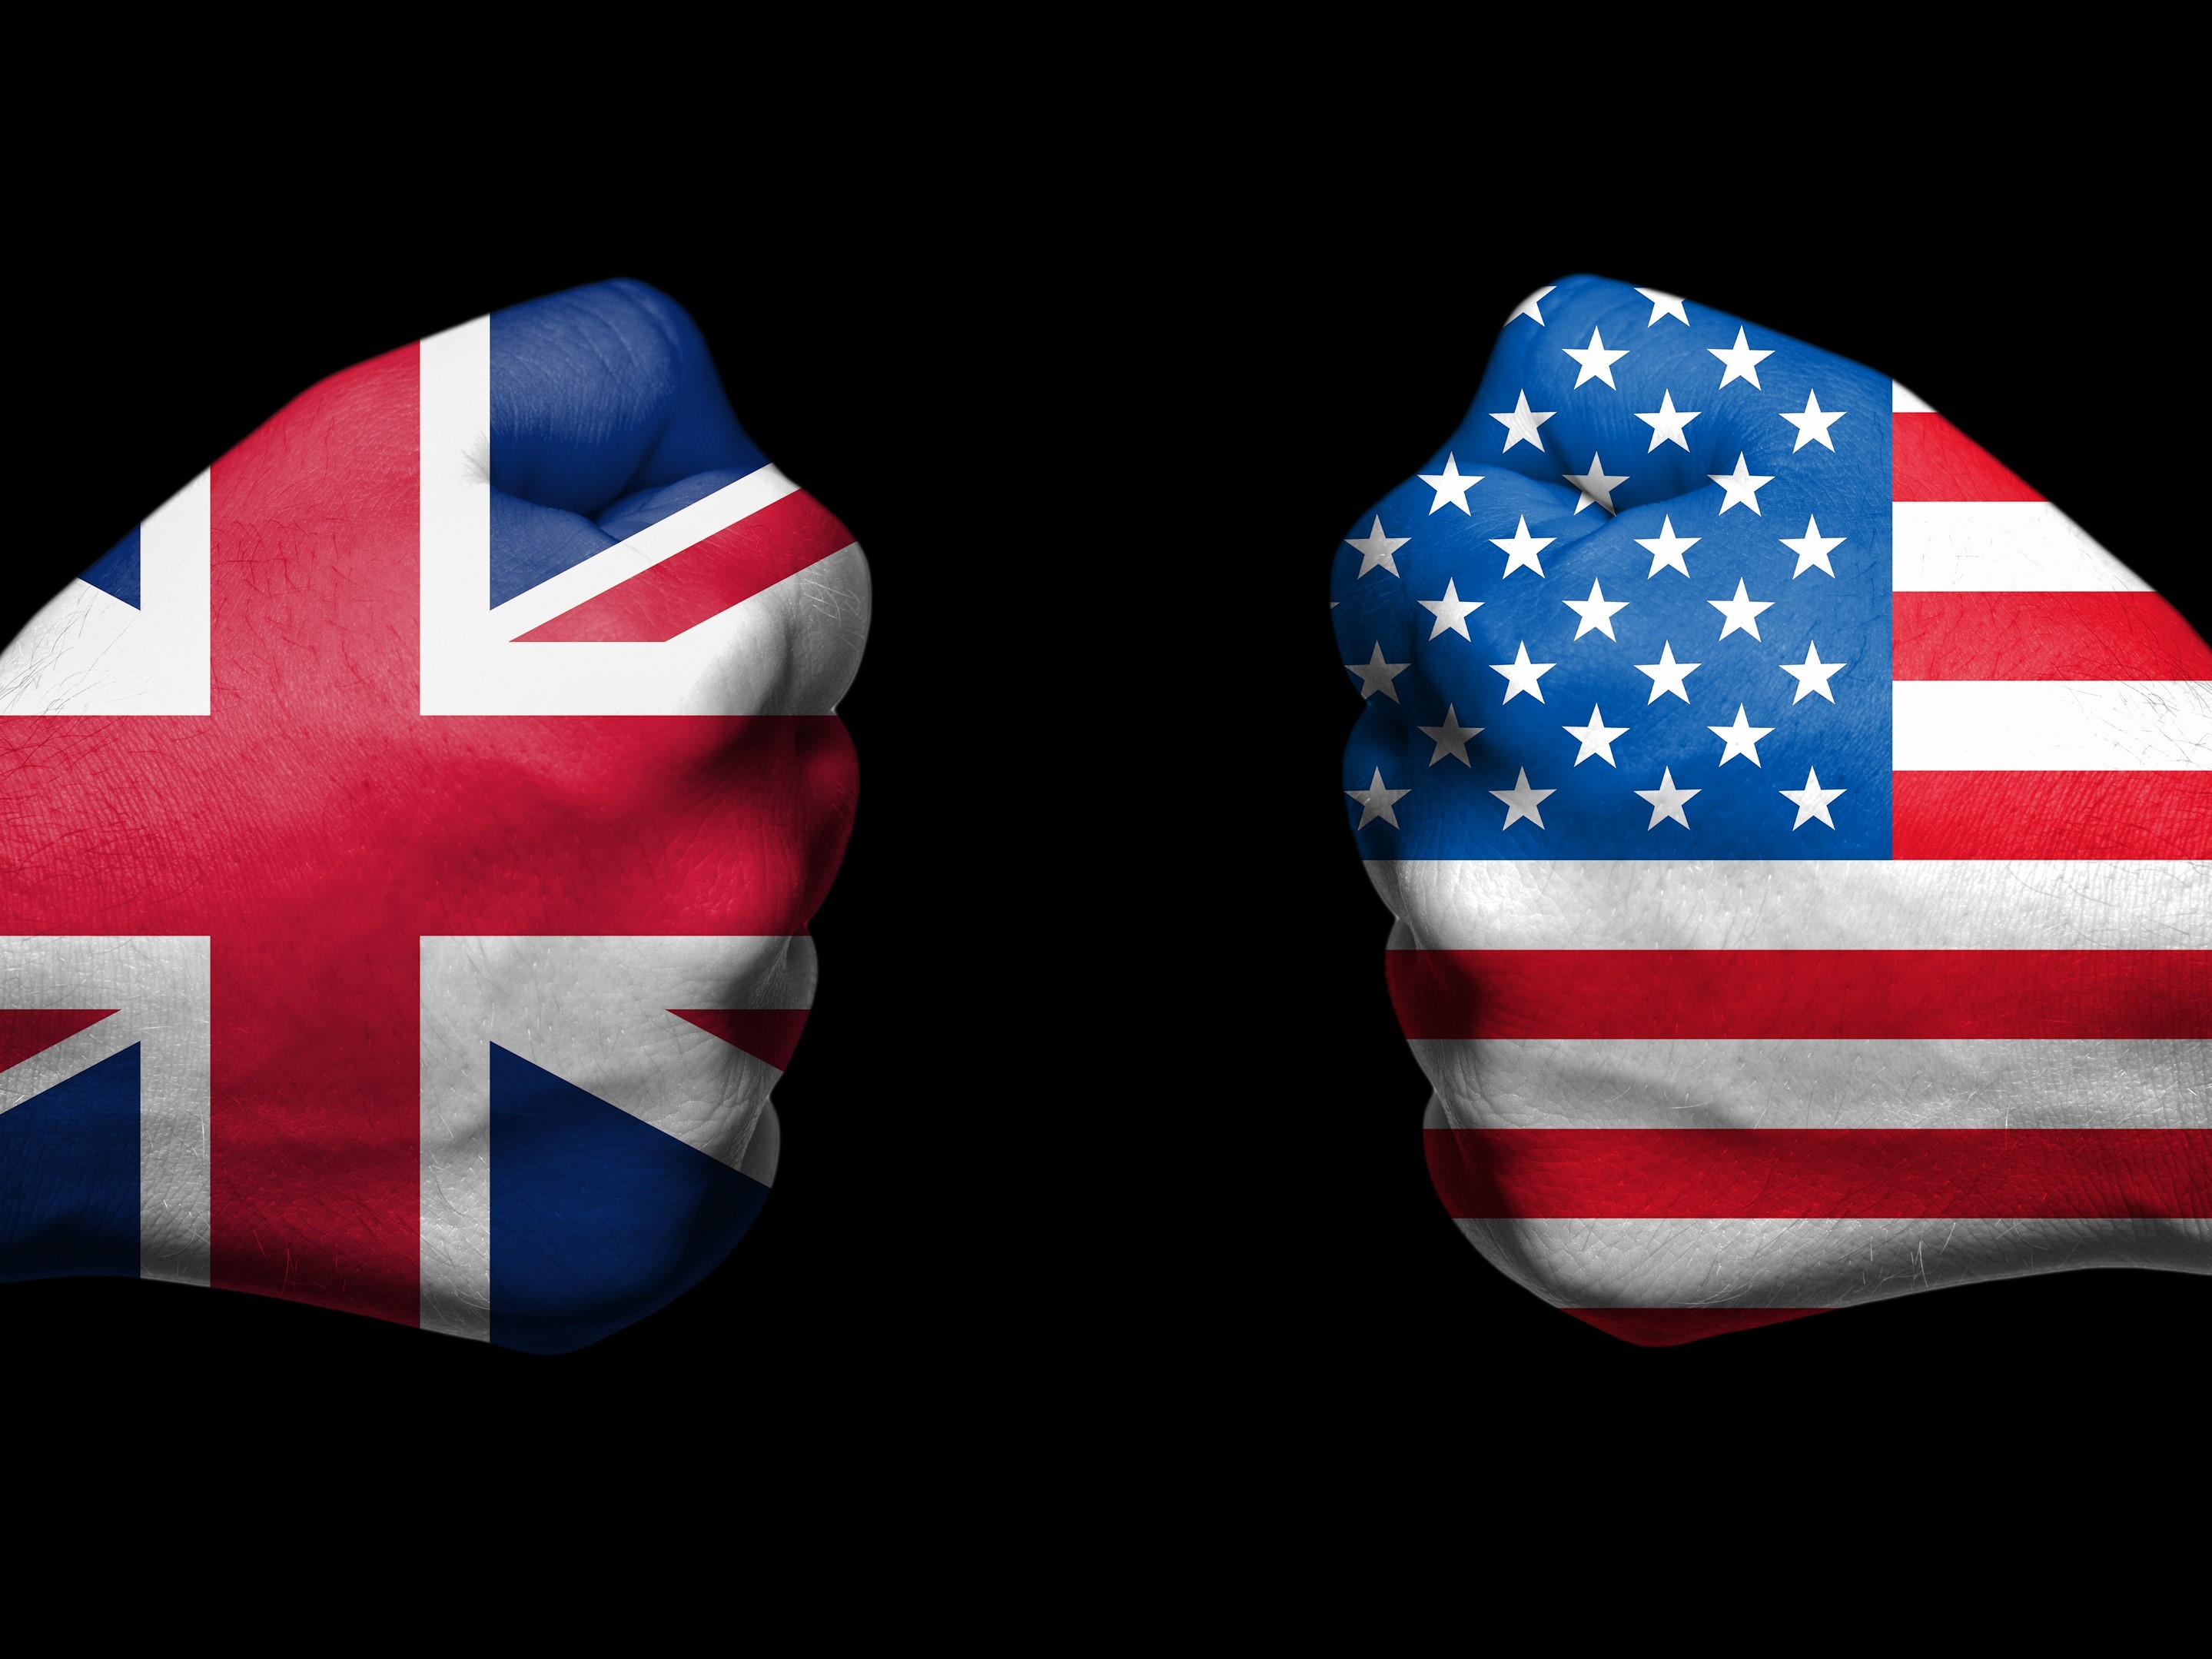 two fists emblazoned with the flags of the UK and US face each other.